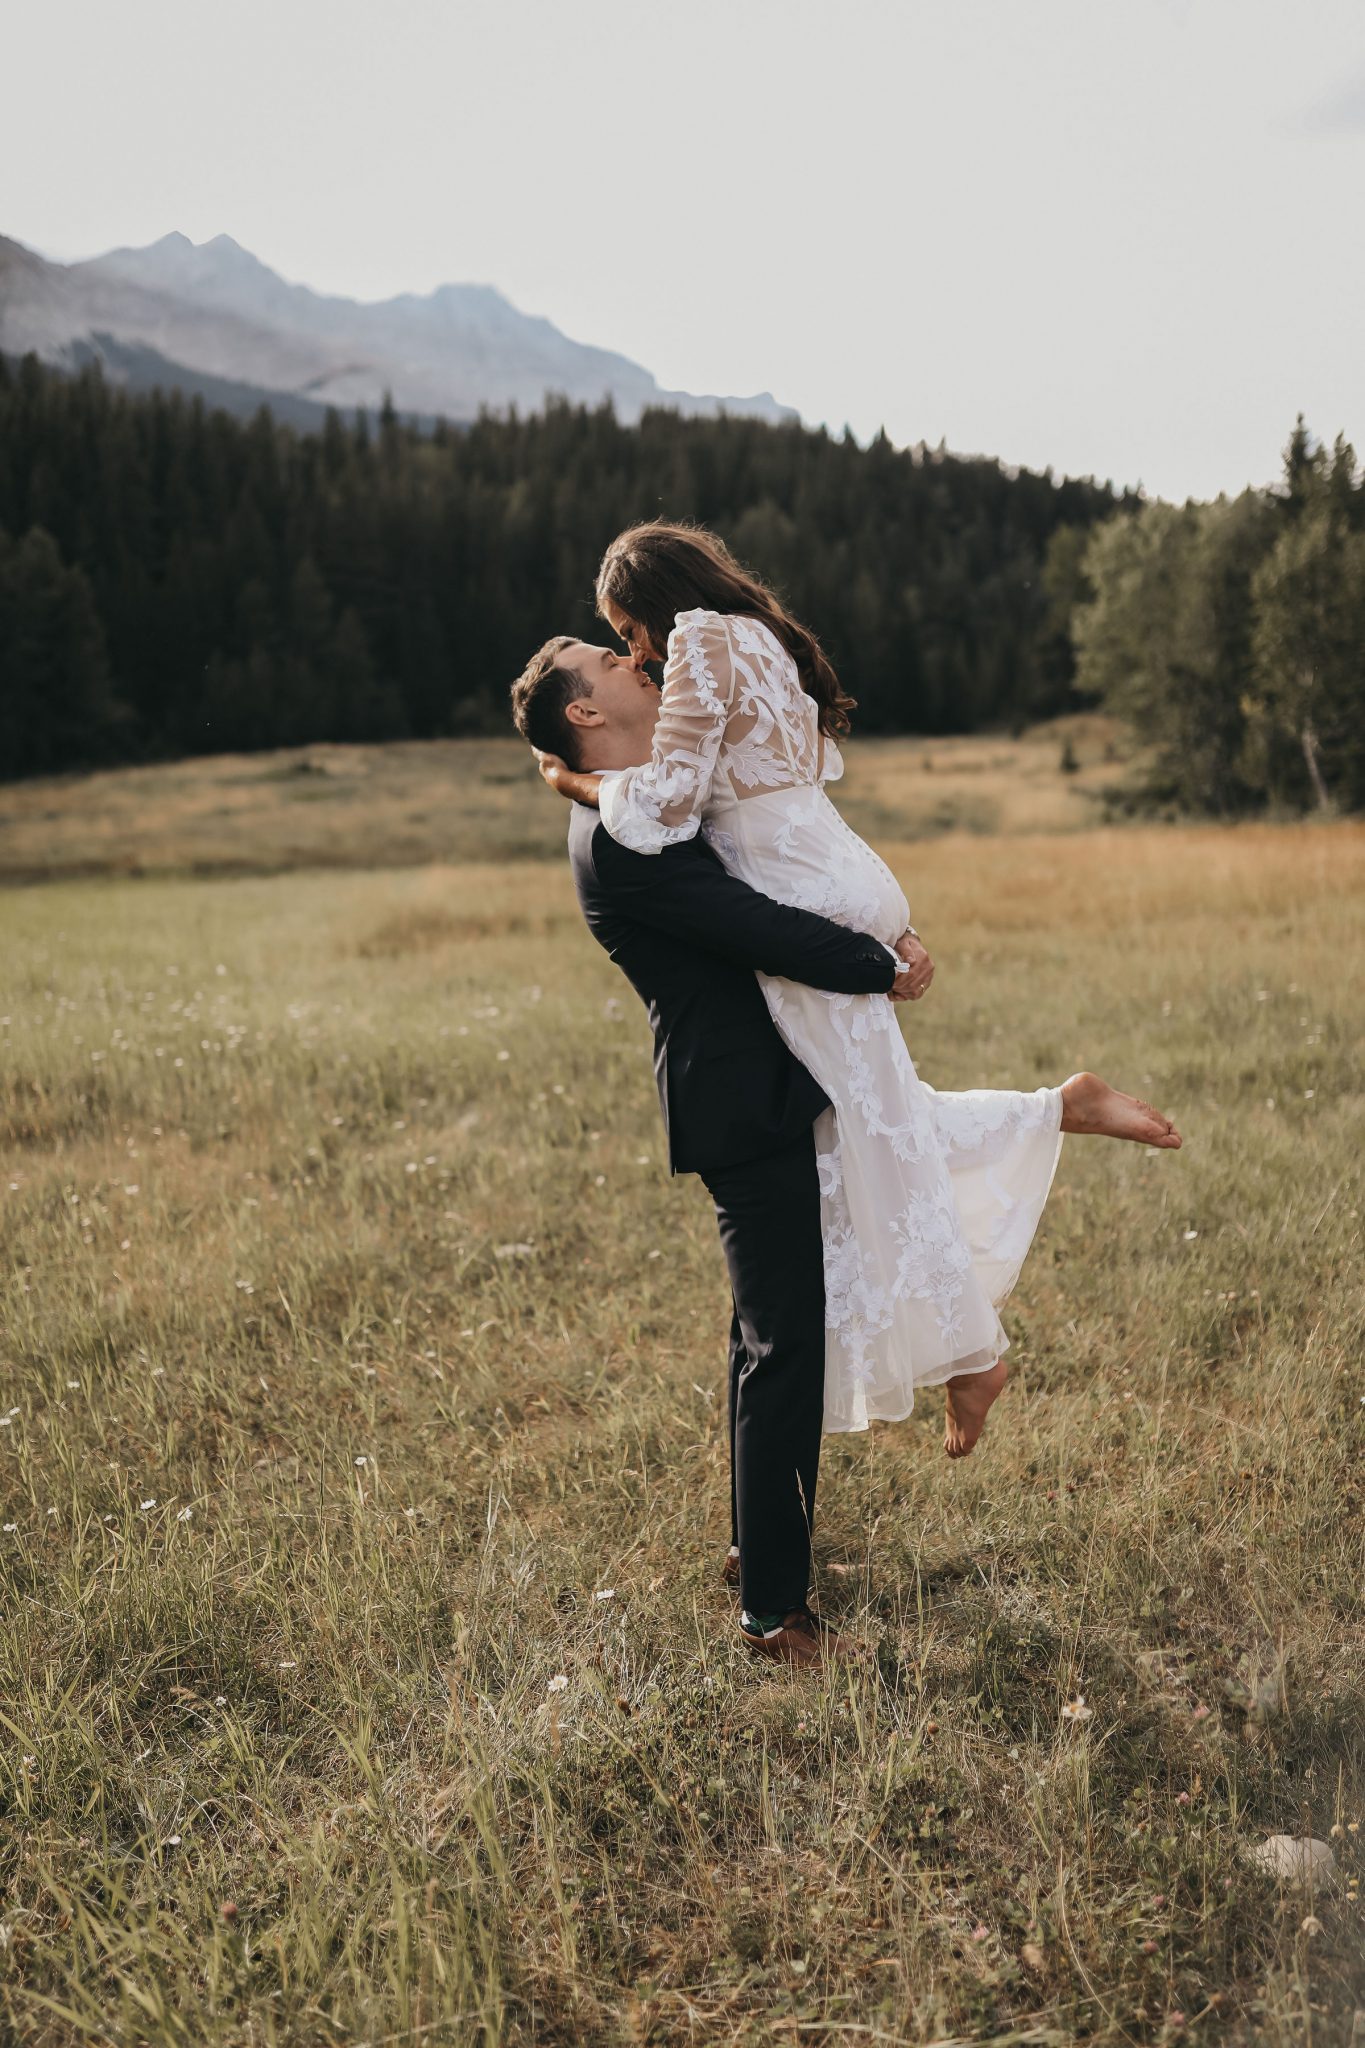 Elopement Advice from an Elopement Photographer: 5 Tips To Help You Plan Your Perfect Elopement